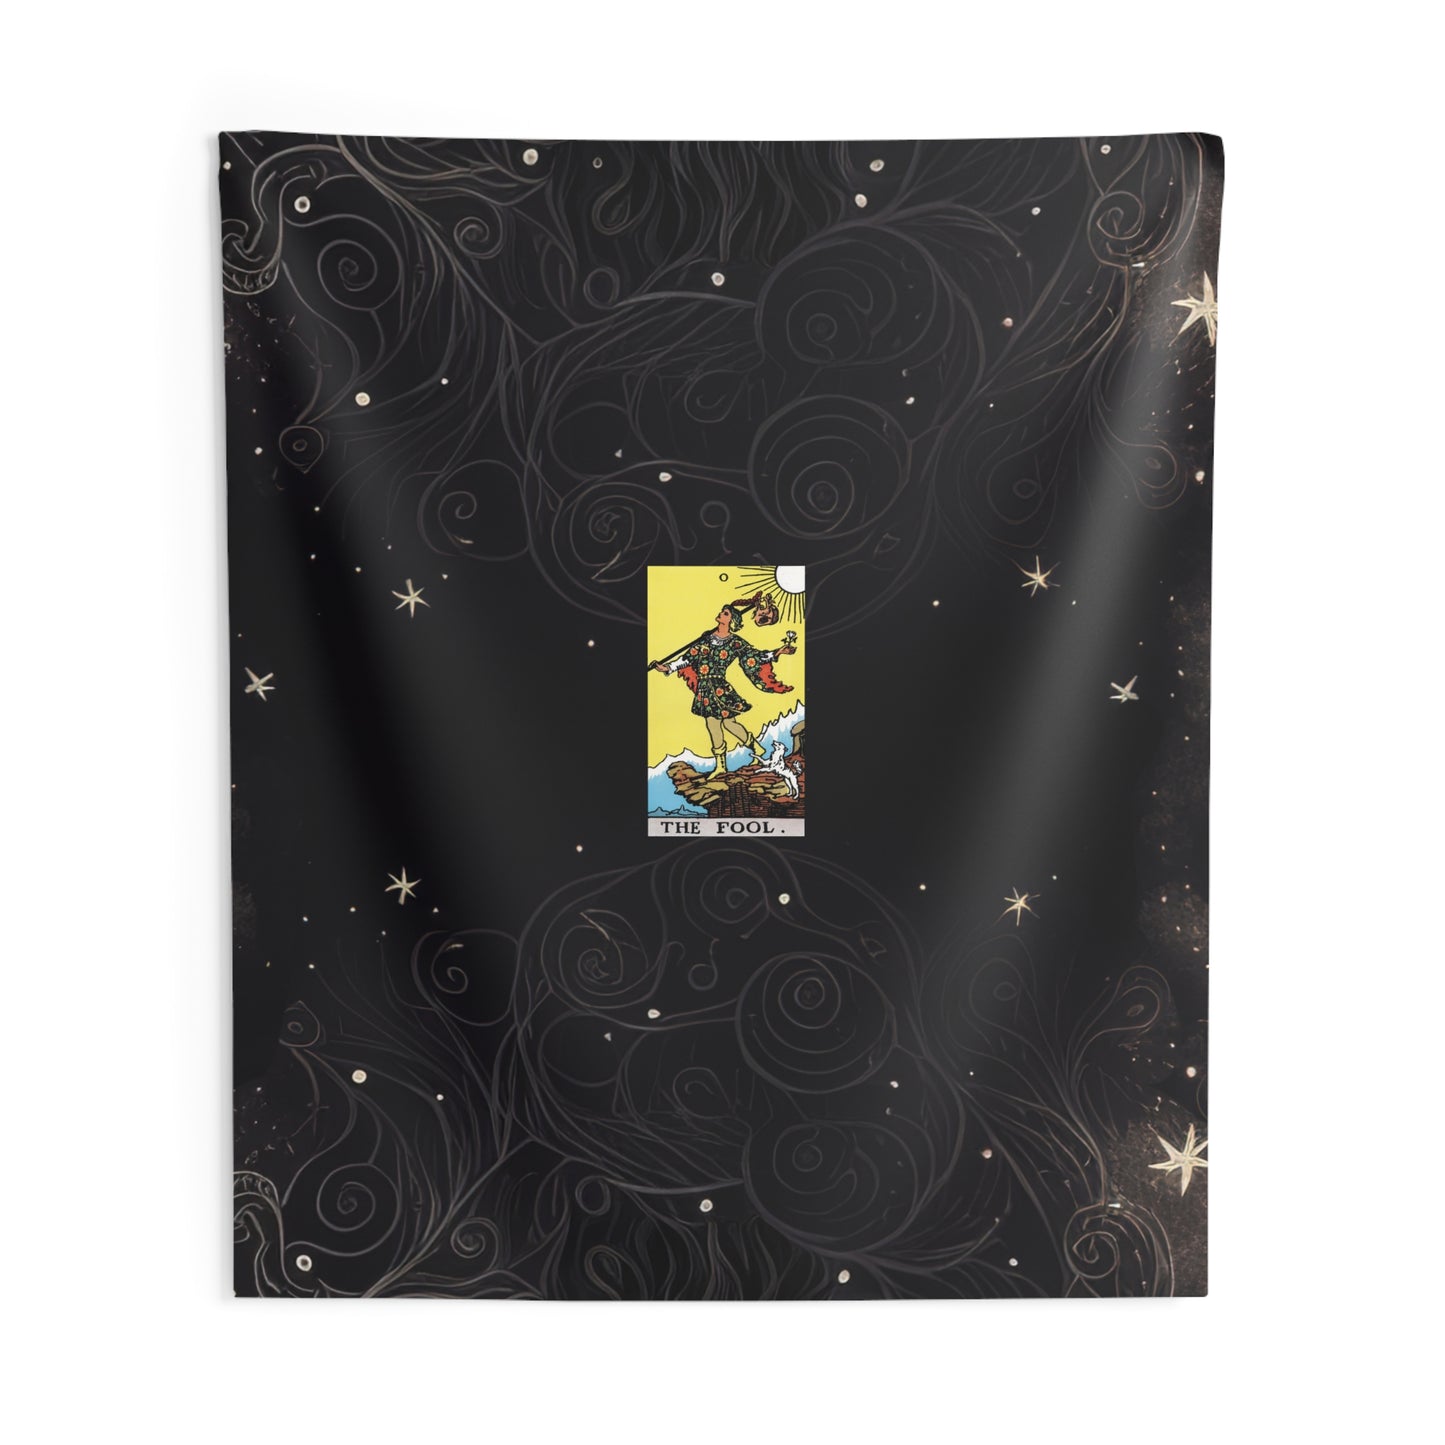 The Fool Tarot Card Altar Cloth or Tapestry with Starry Background